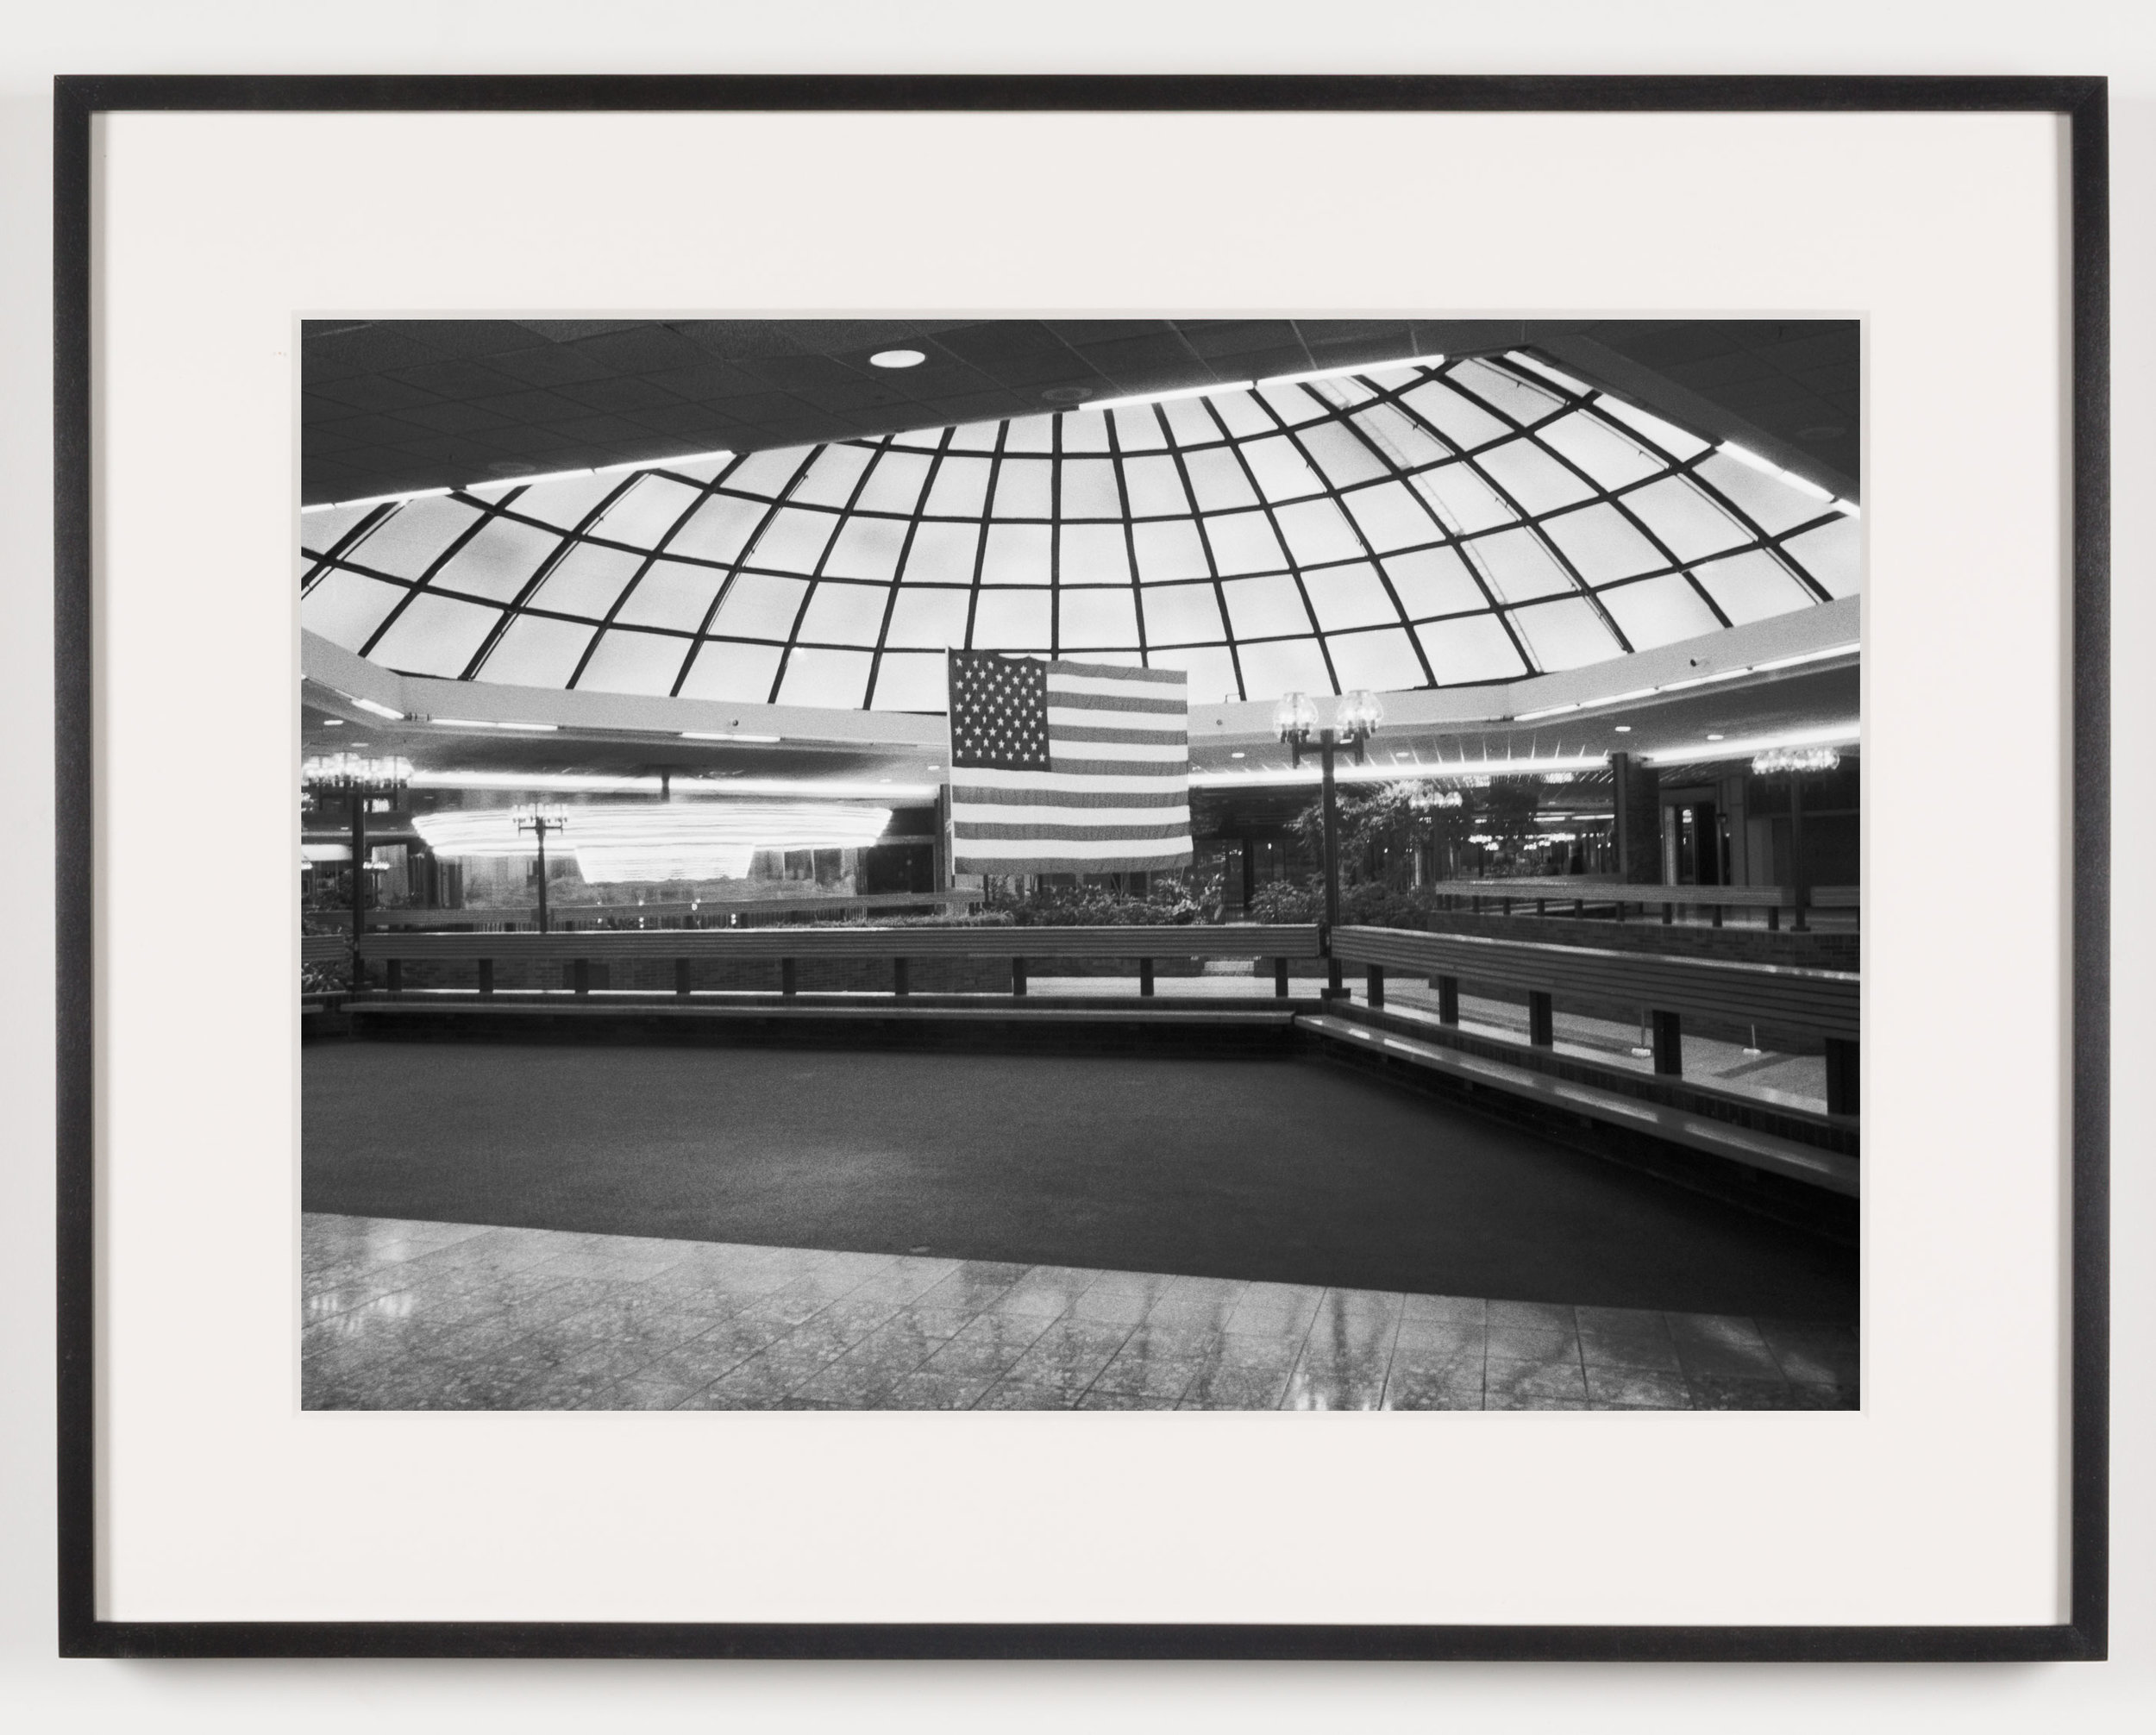   Southwyck Mall (View of Fountain), Toledo, OH, Est. 1972, Demo. 2009   2011  Epson Ultrachrome K3 archival ink jet print on Hahnemühle Photo Rag paper  21 5/8 x 28 1/8 inches   American Passages, 2001–2011    A Diagram of Forces, 2011     